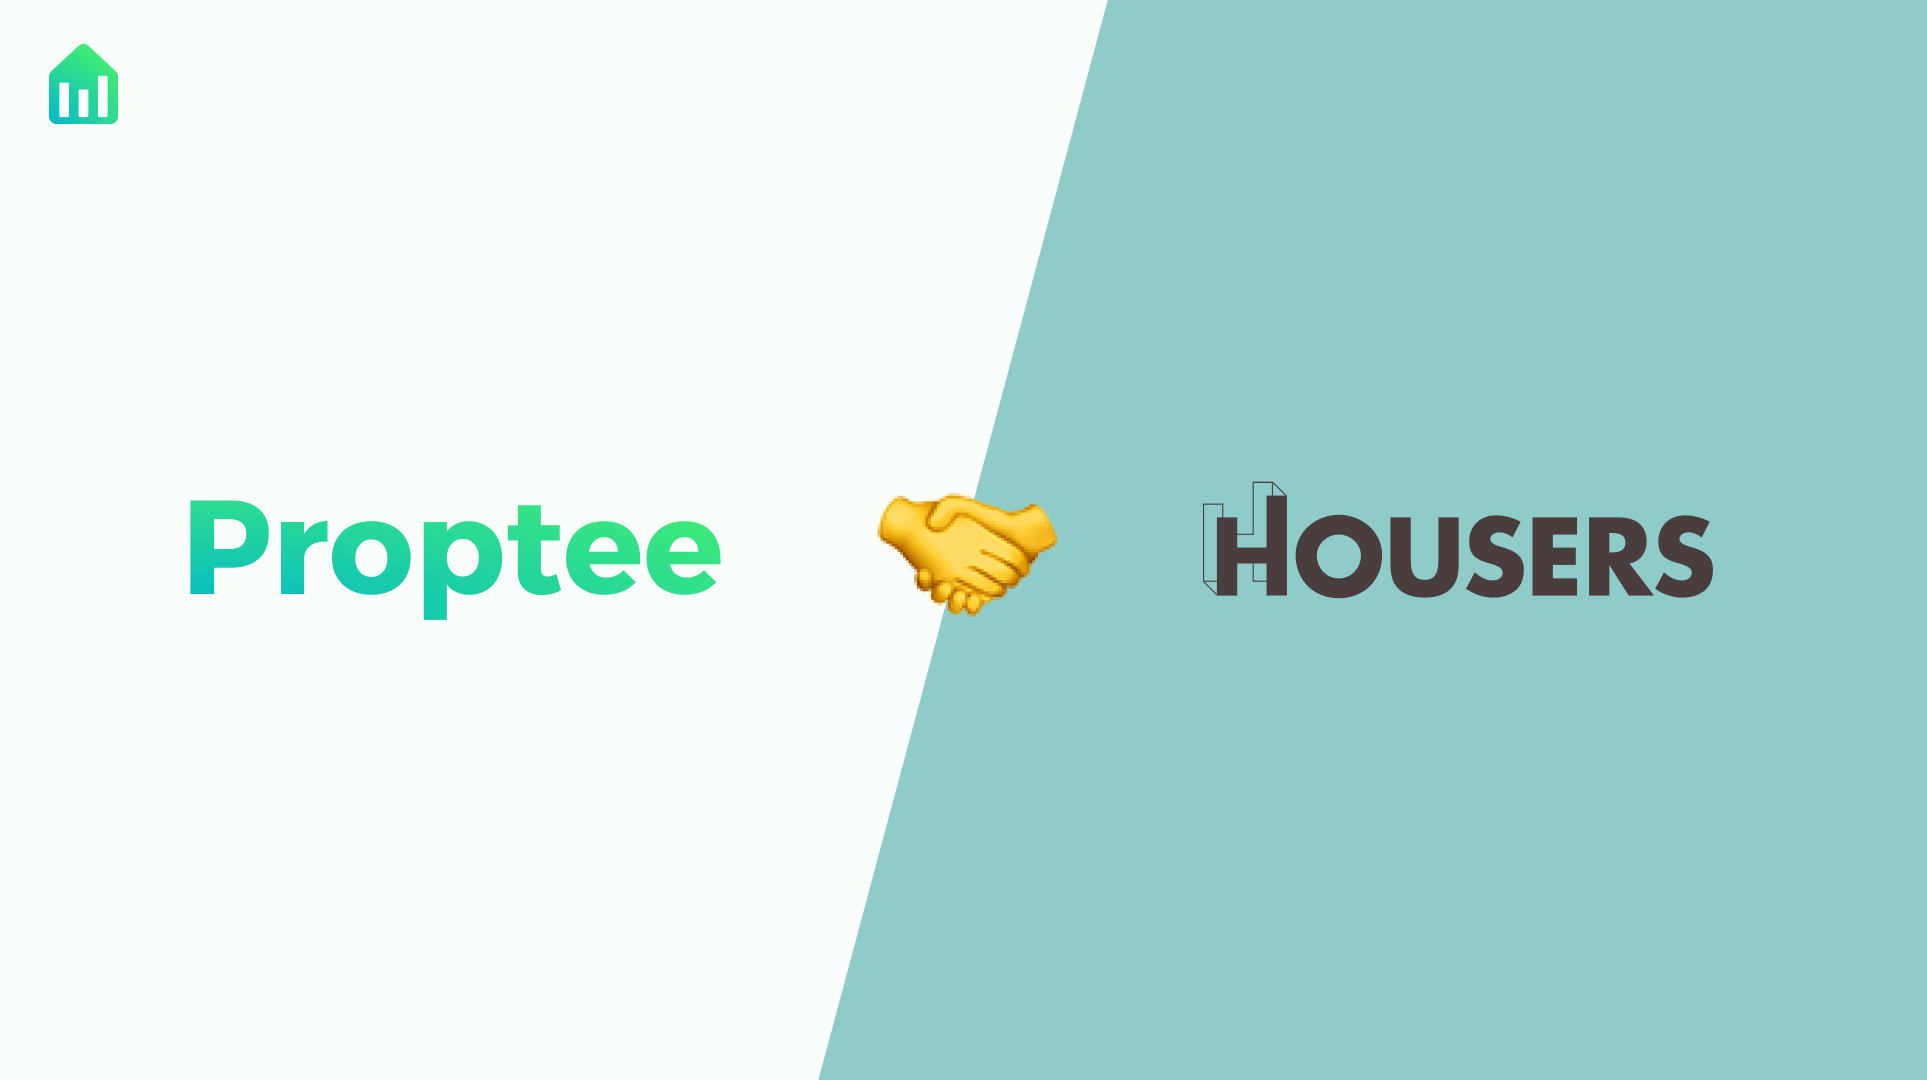 We partnered with Housers